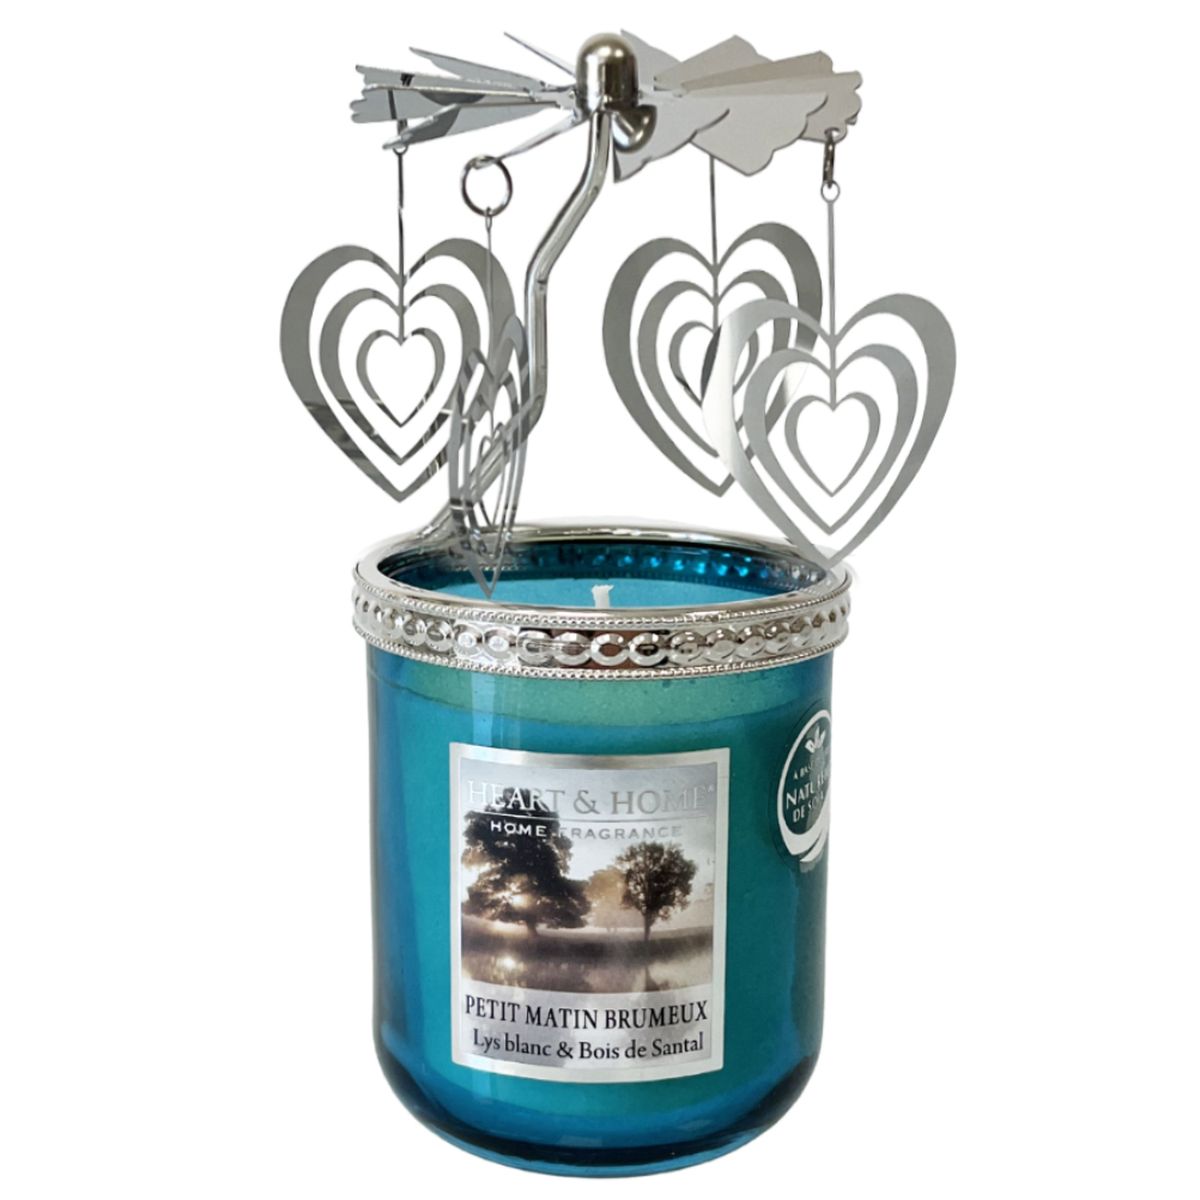 Carrousel pour petite jarre Heart and Home